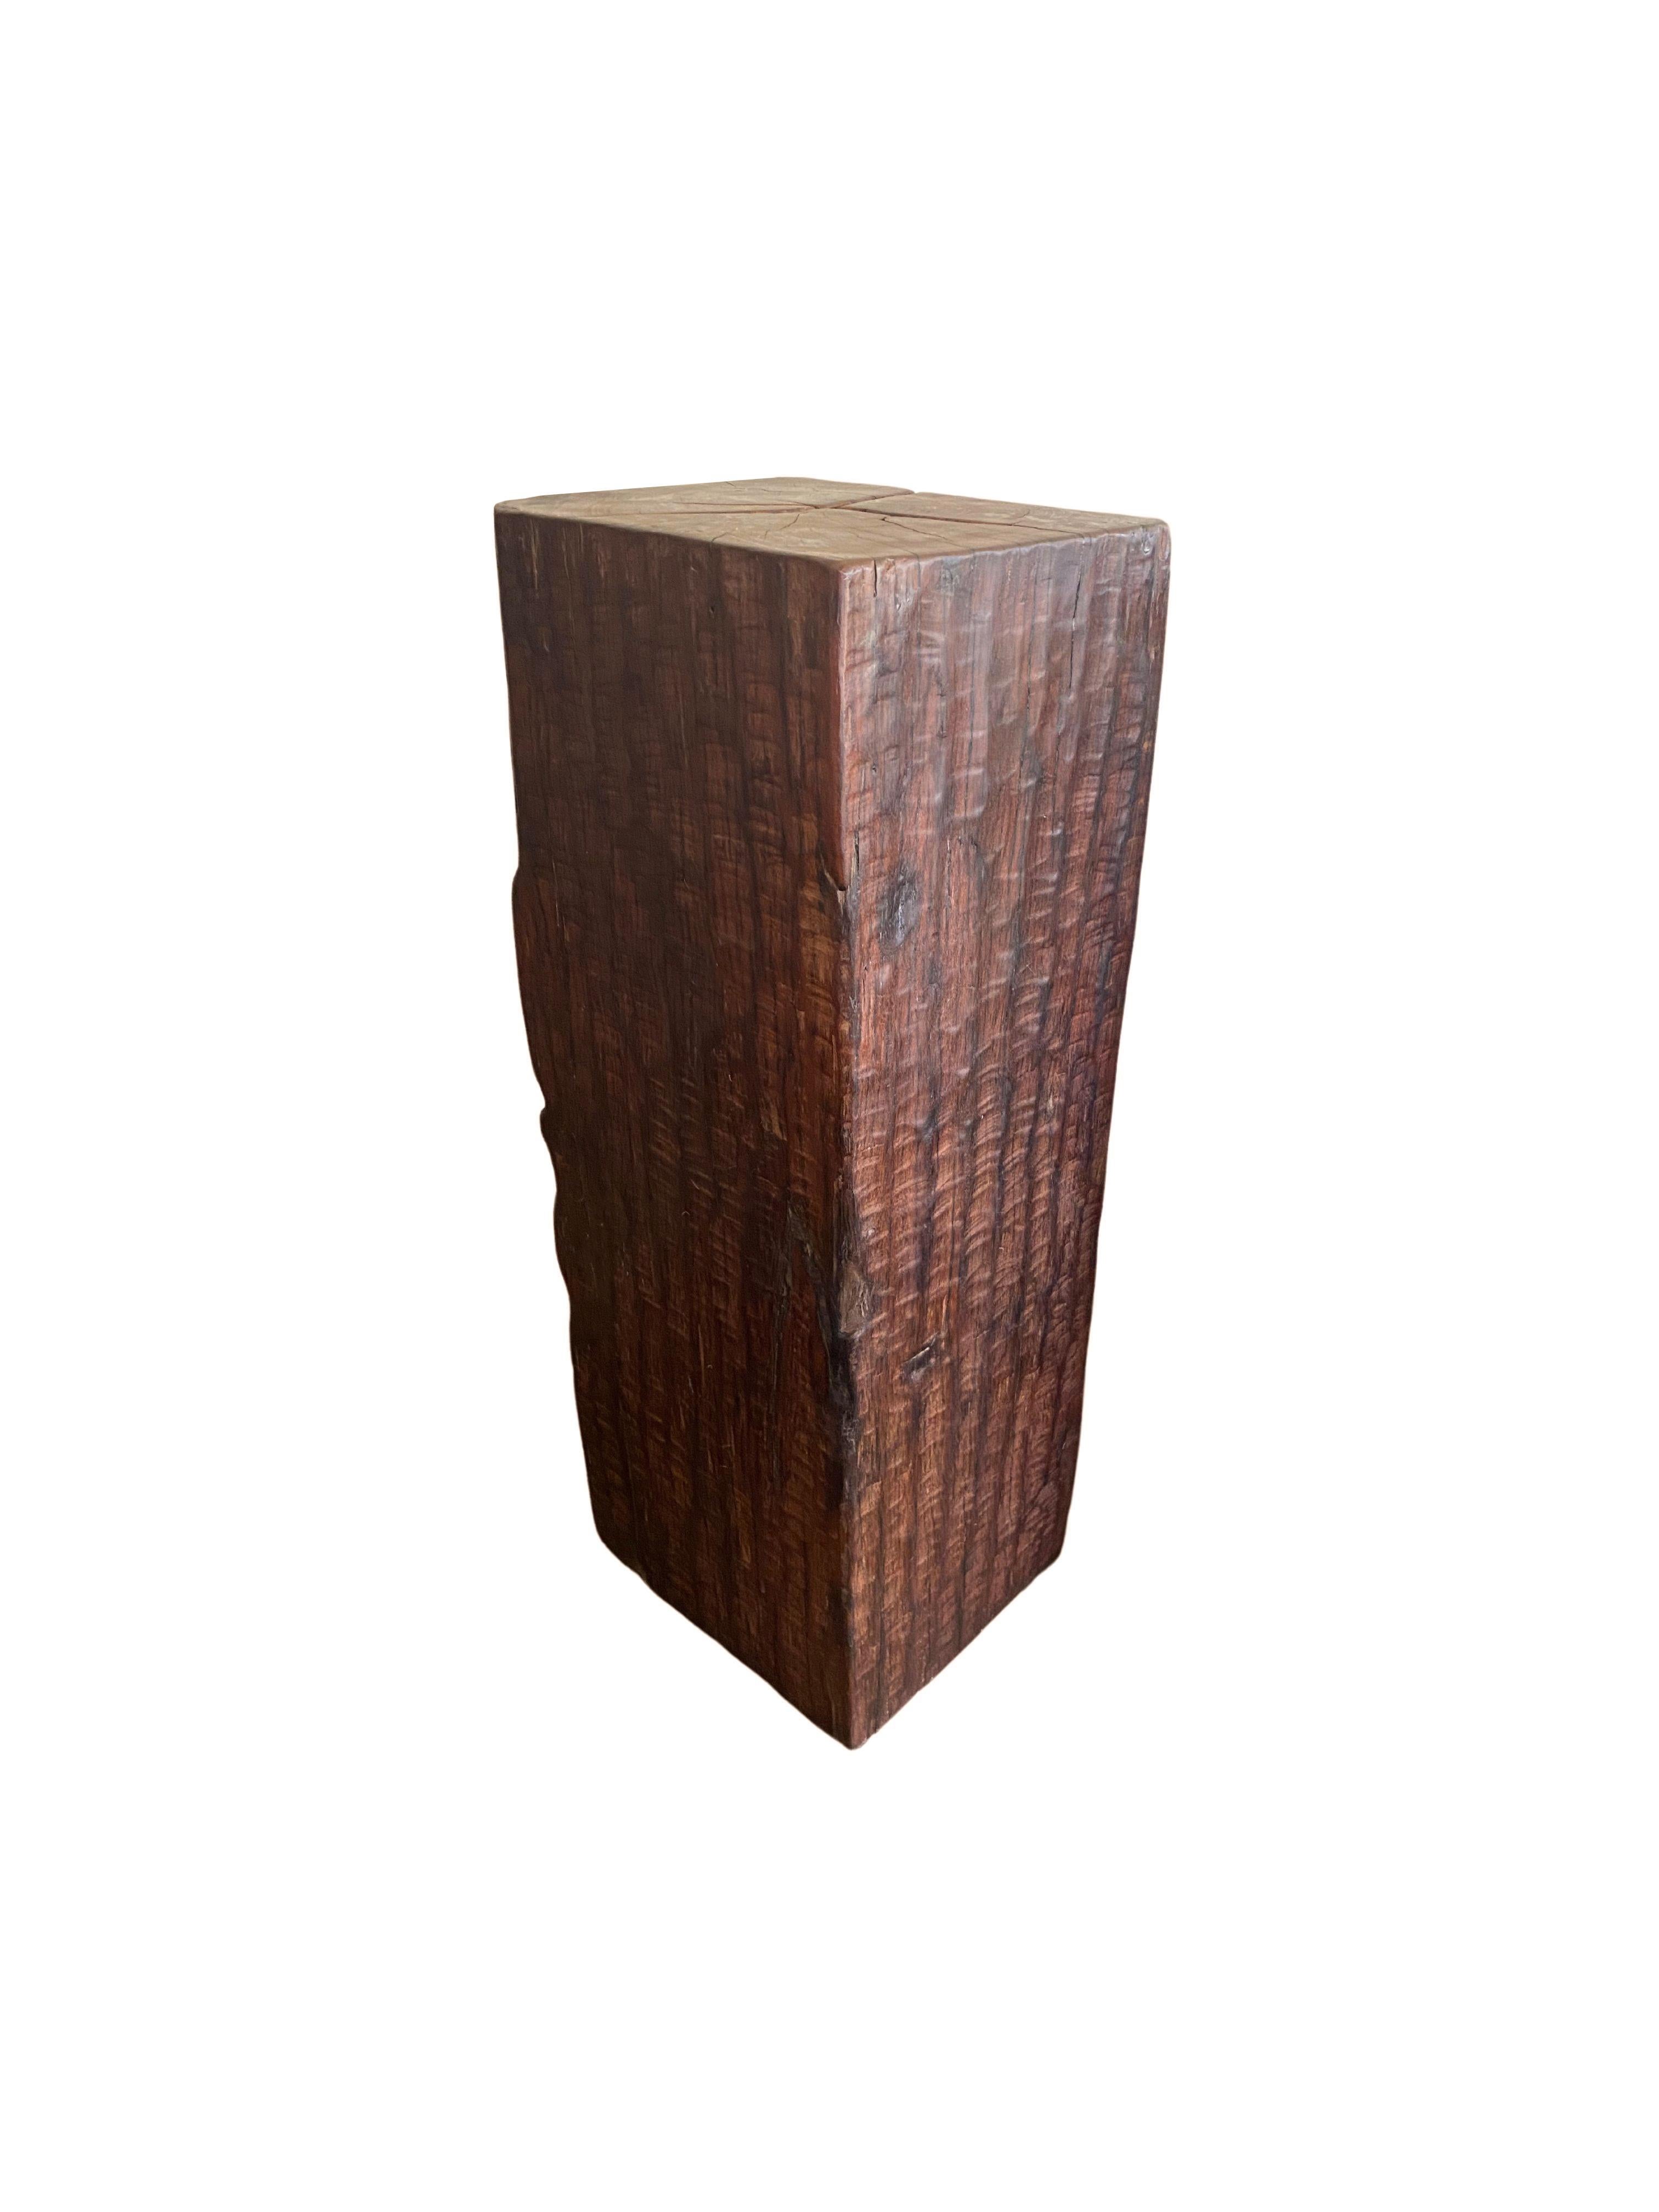 Solid Iron Wood Pedestal with Stunning Wood Texture For Sale 3